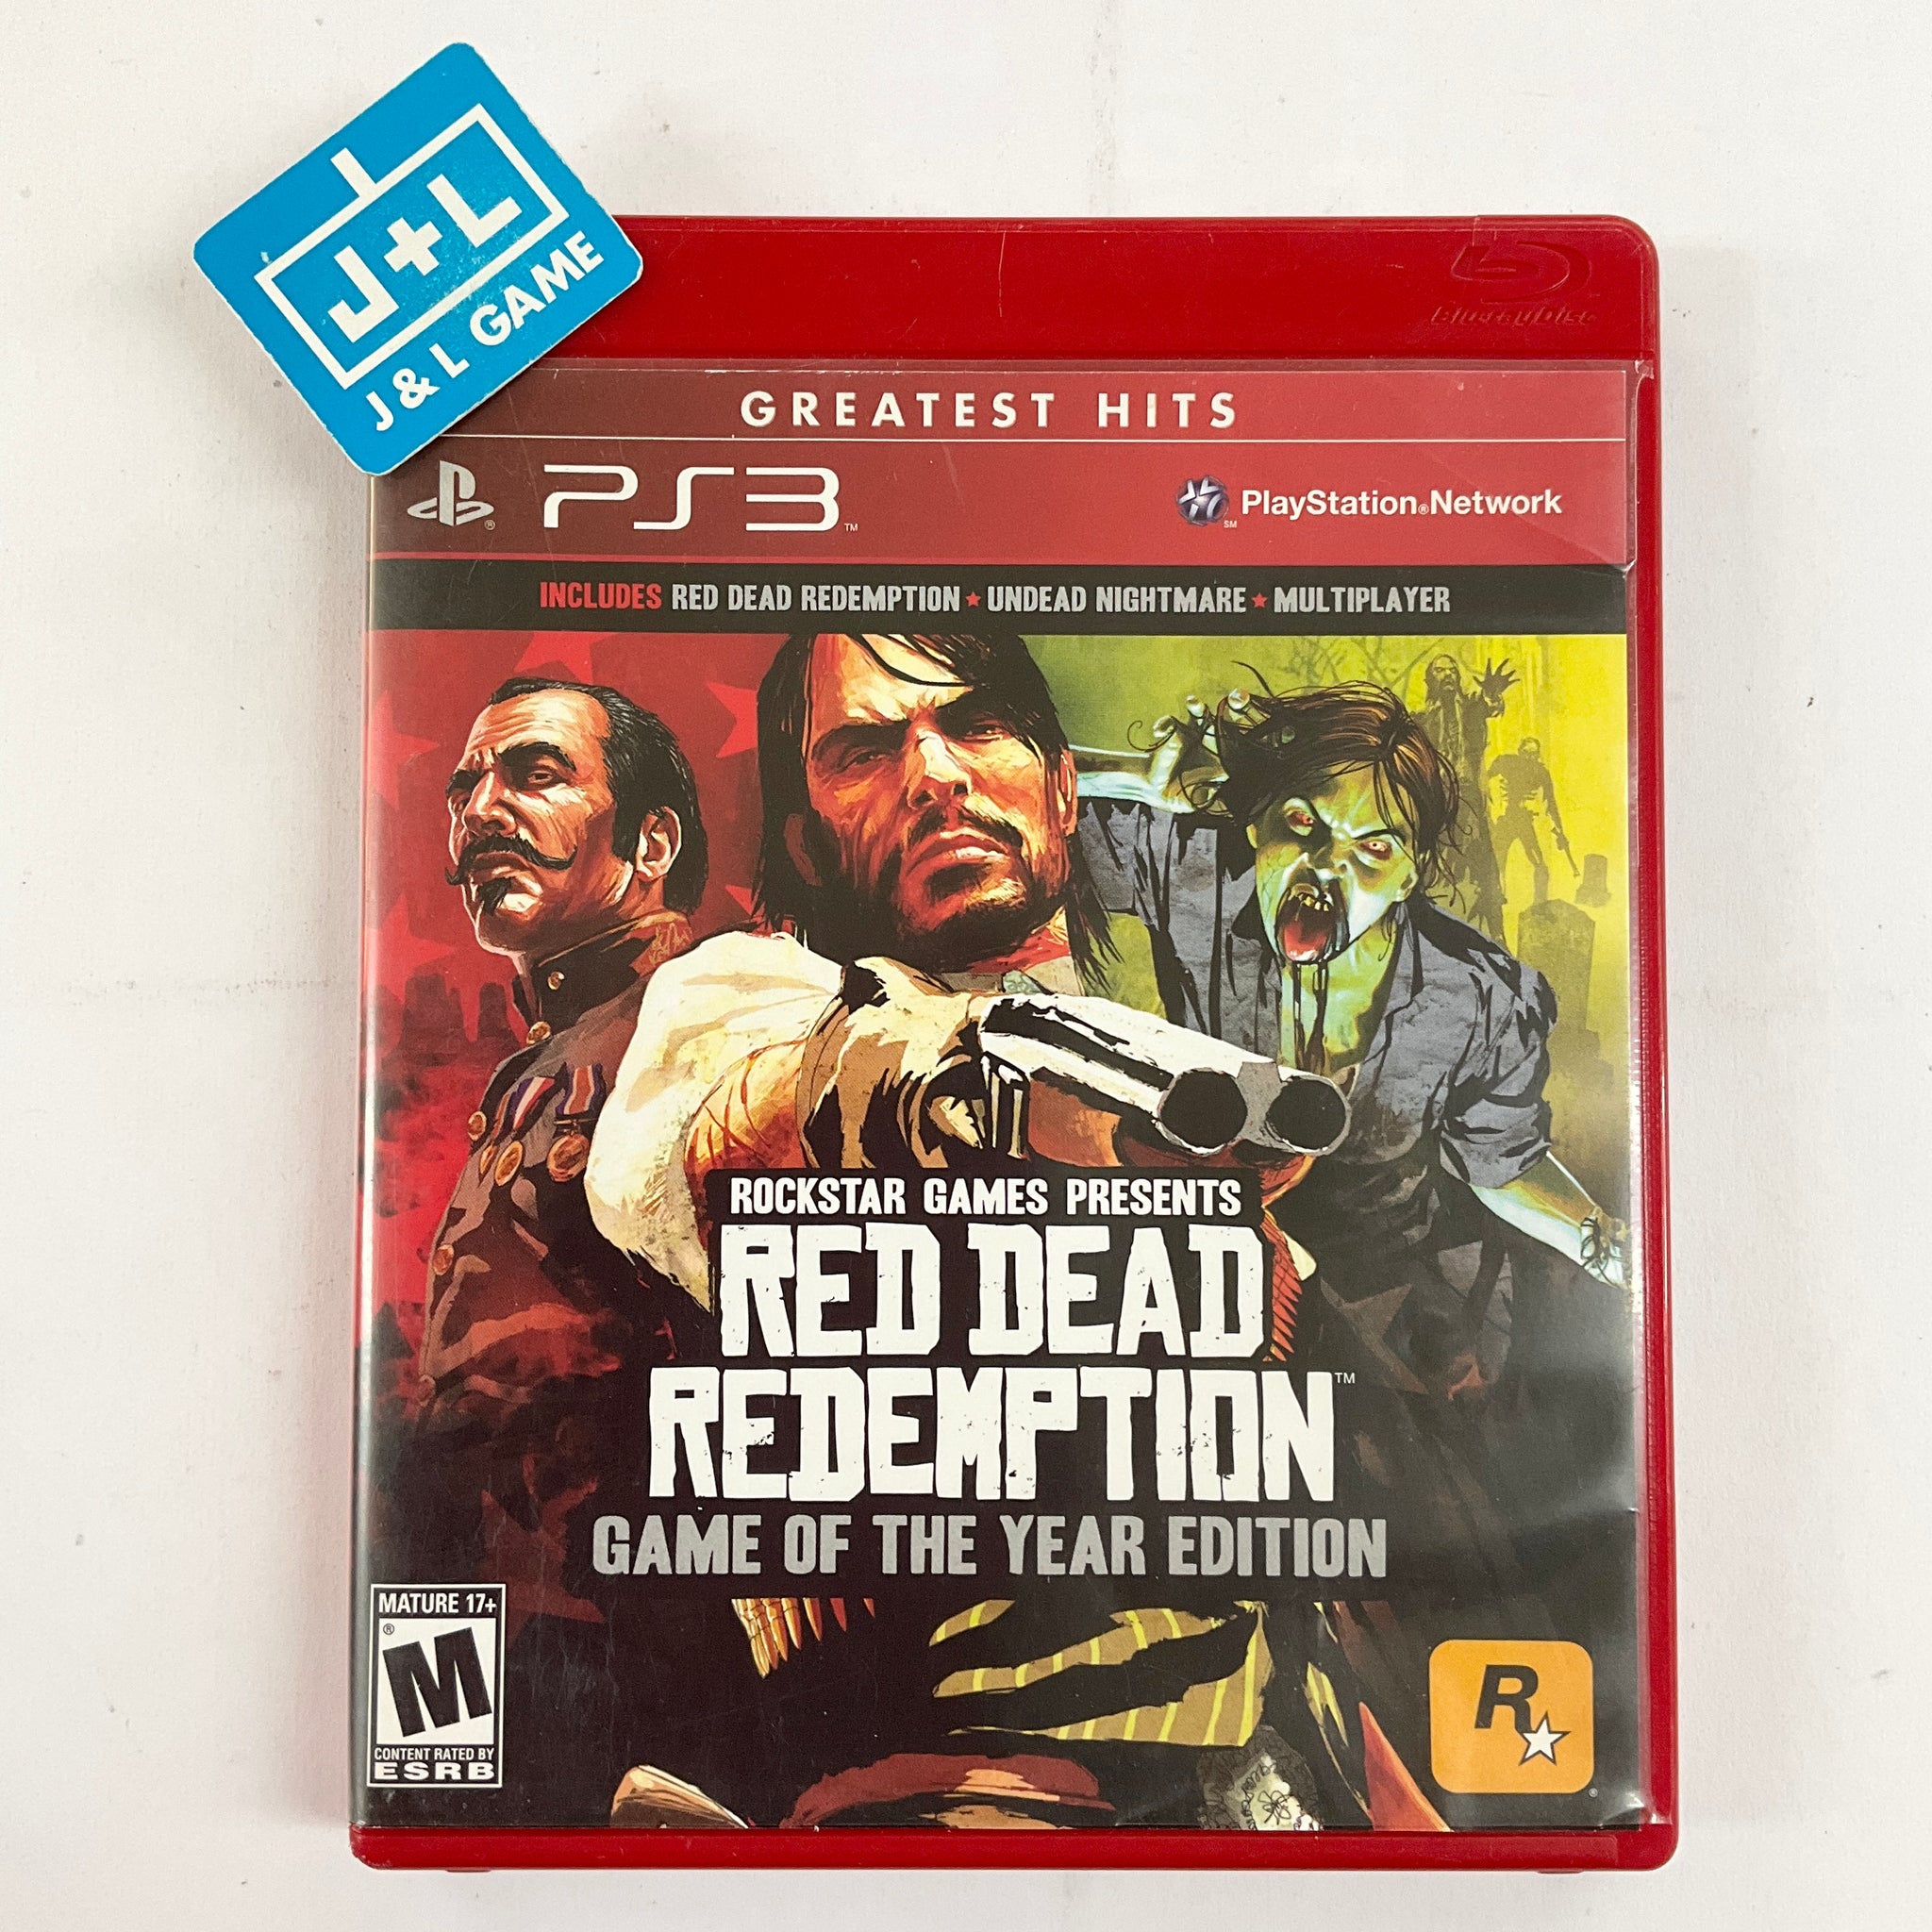 Red Dead Redemption Rockstar Games PS3 Video Game w/ Map and Manual